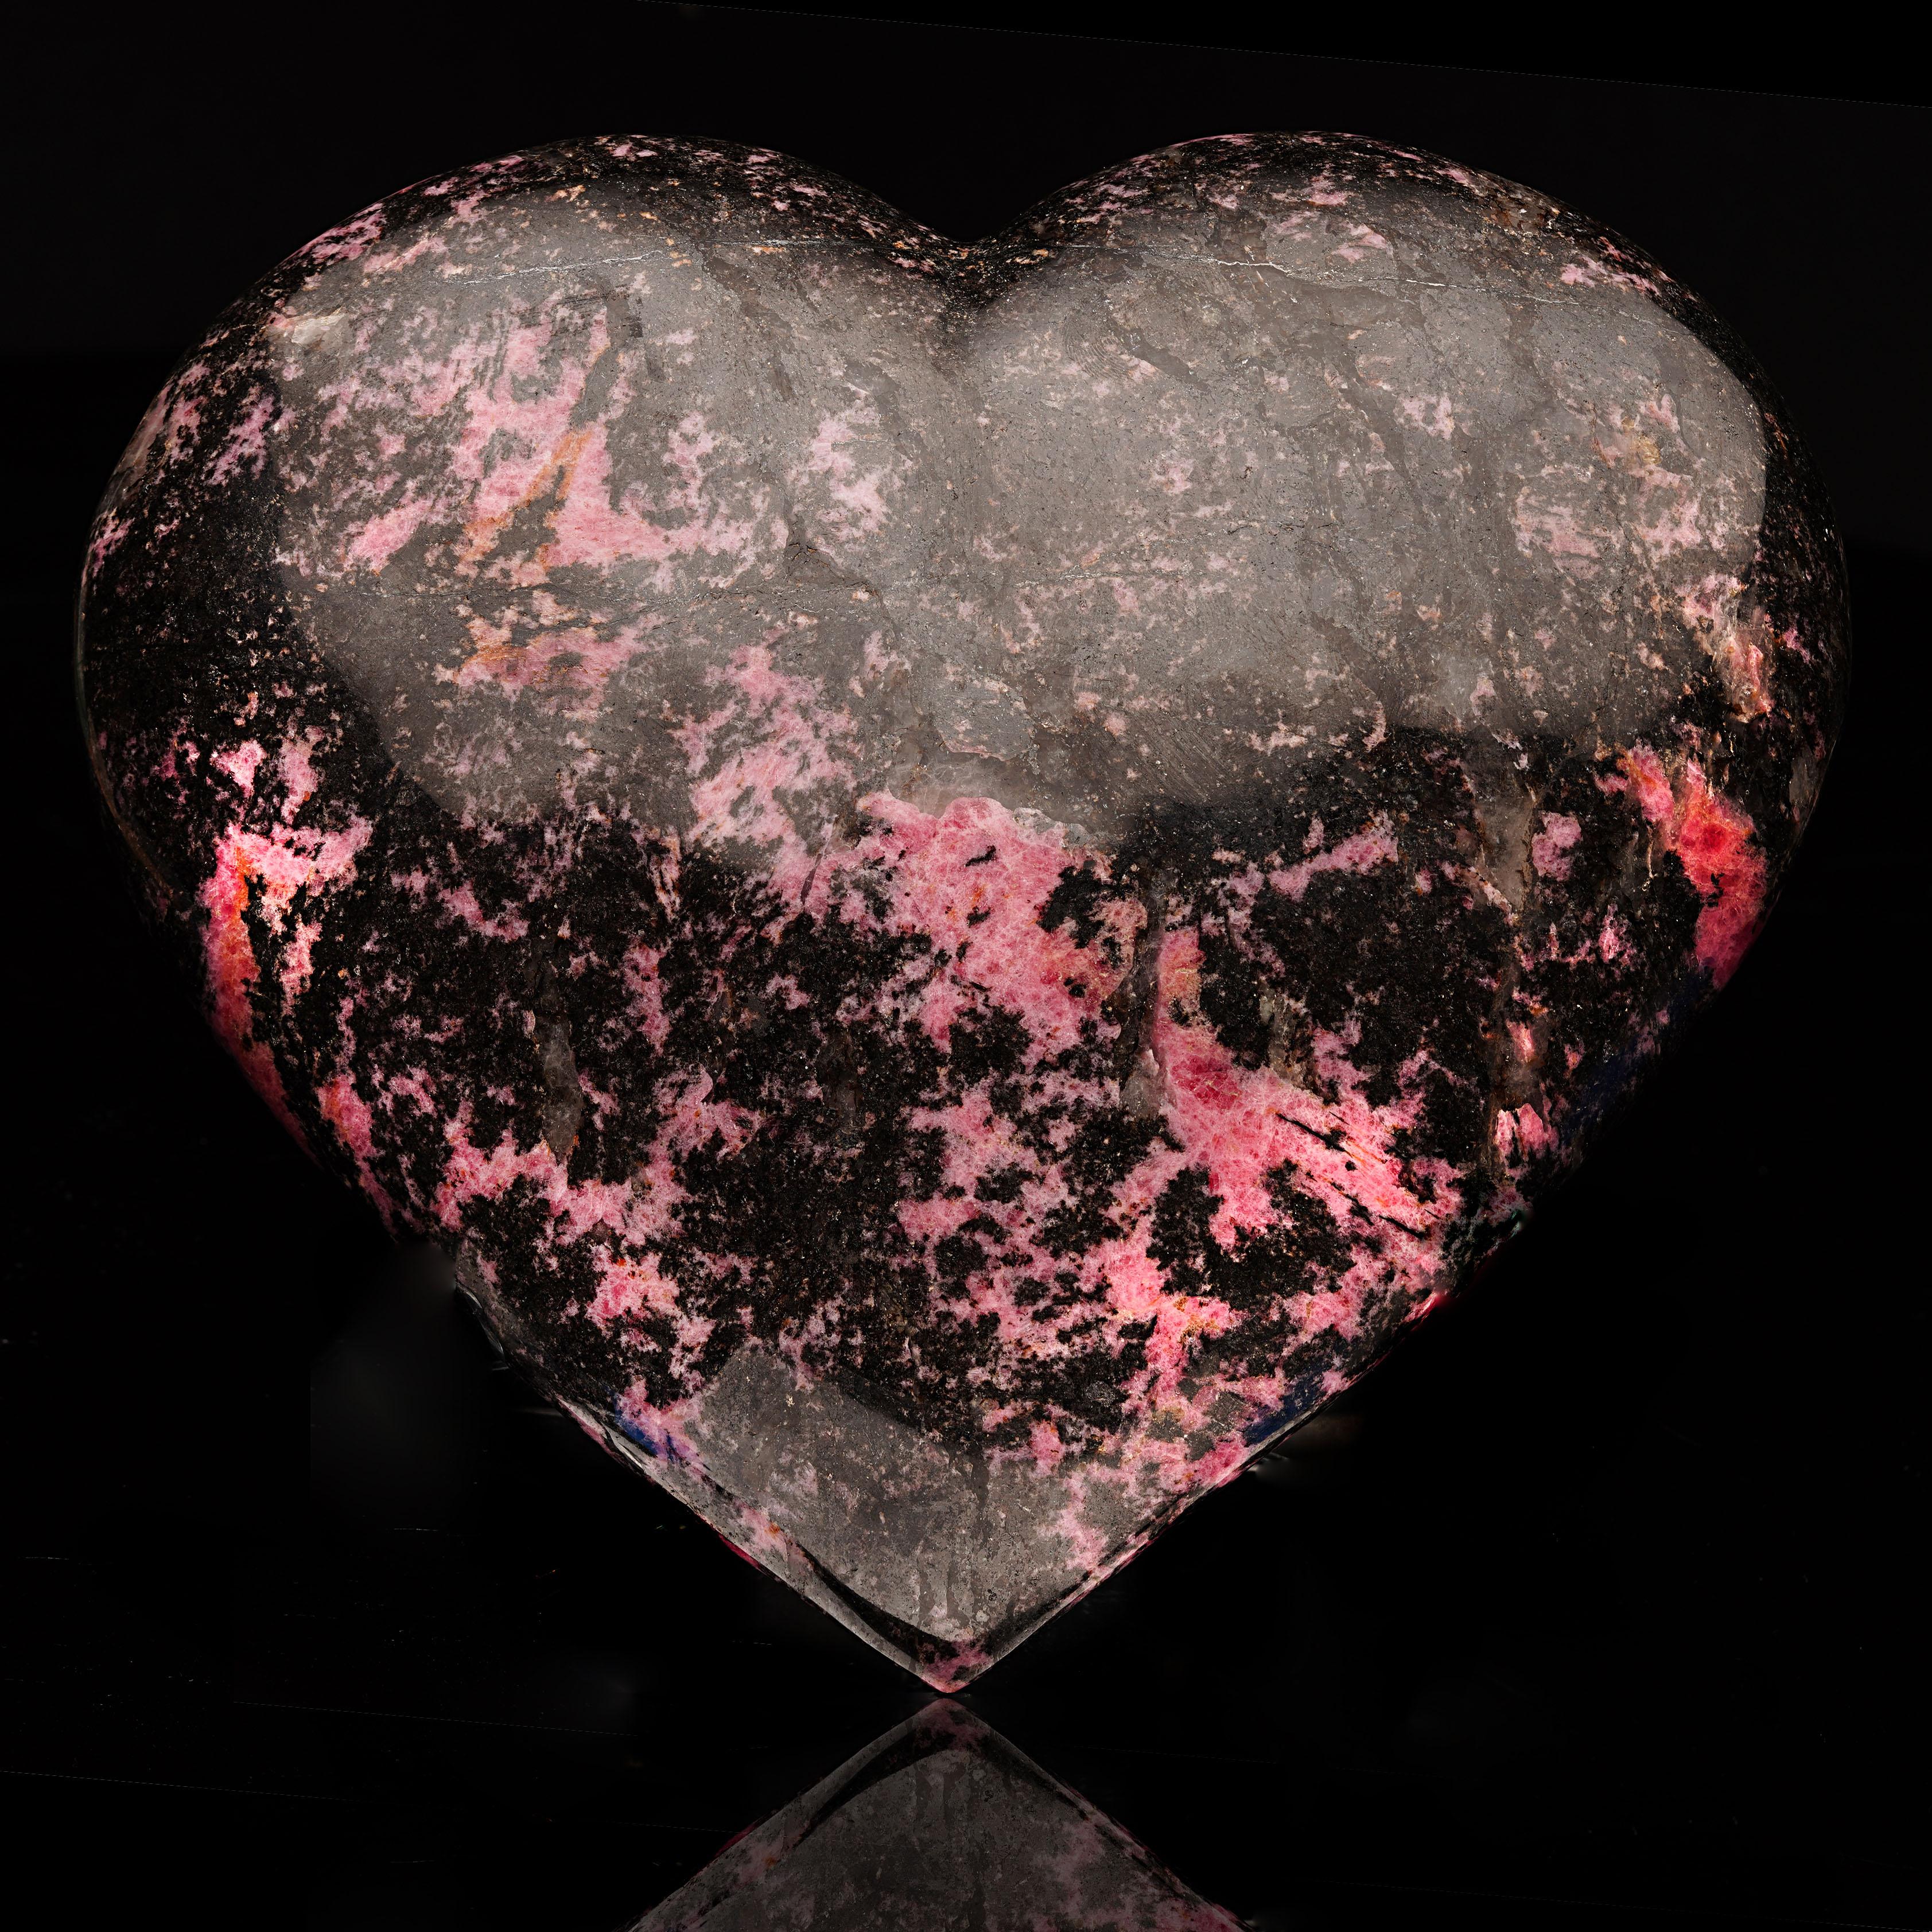 This huge marbled pink and black heart has been hand-carved and hand-polished from high quality Brazilian rhodonite. A striking addition to any home or an impactful gift for a loved one.

Dimensions: 9